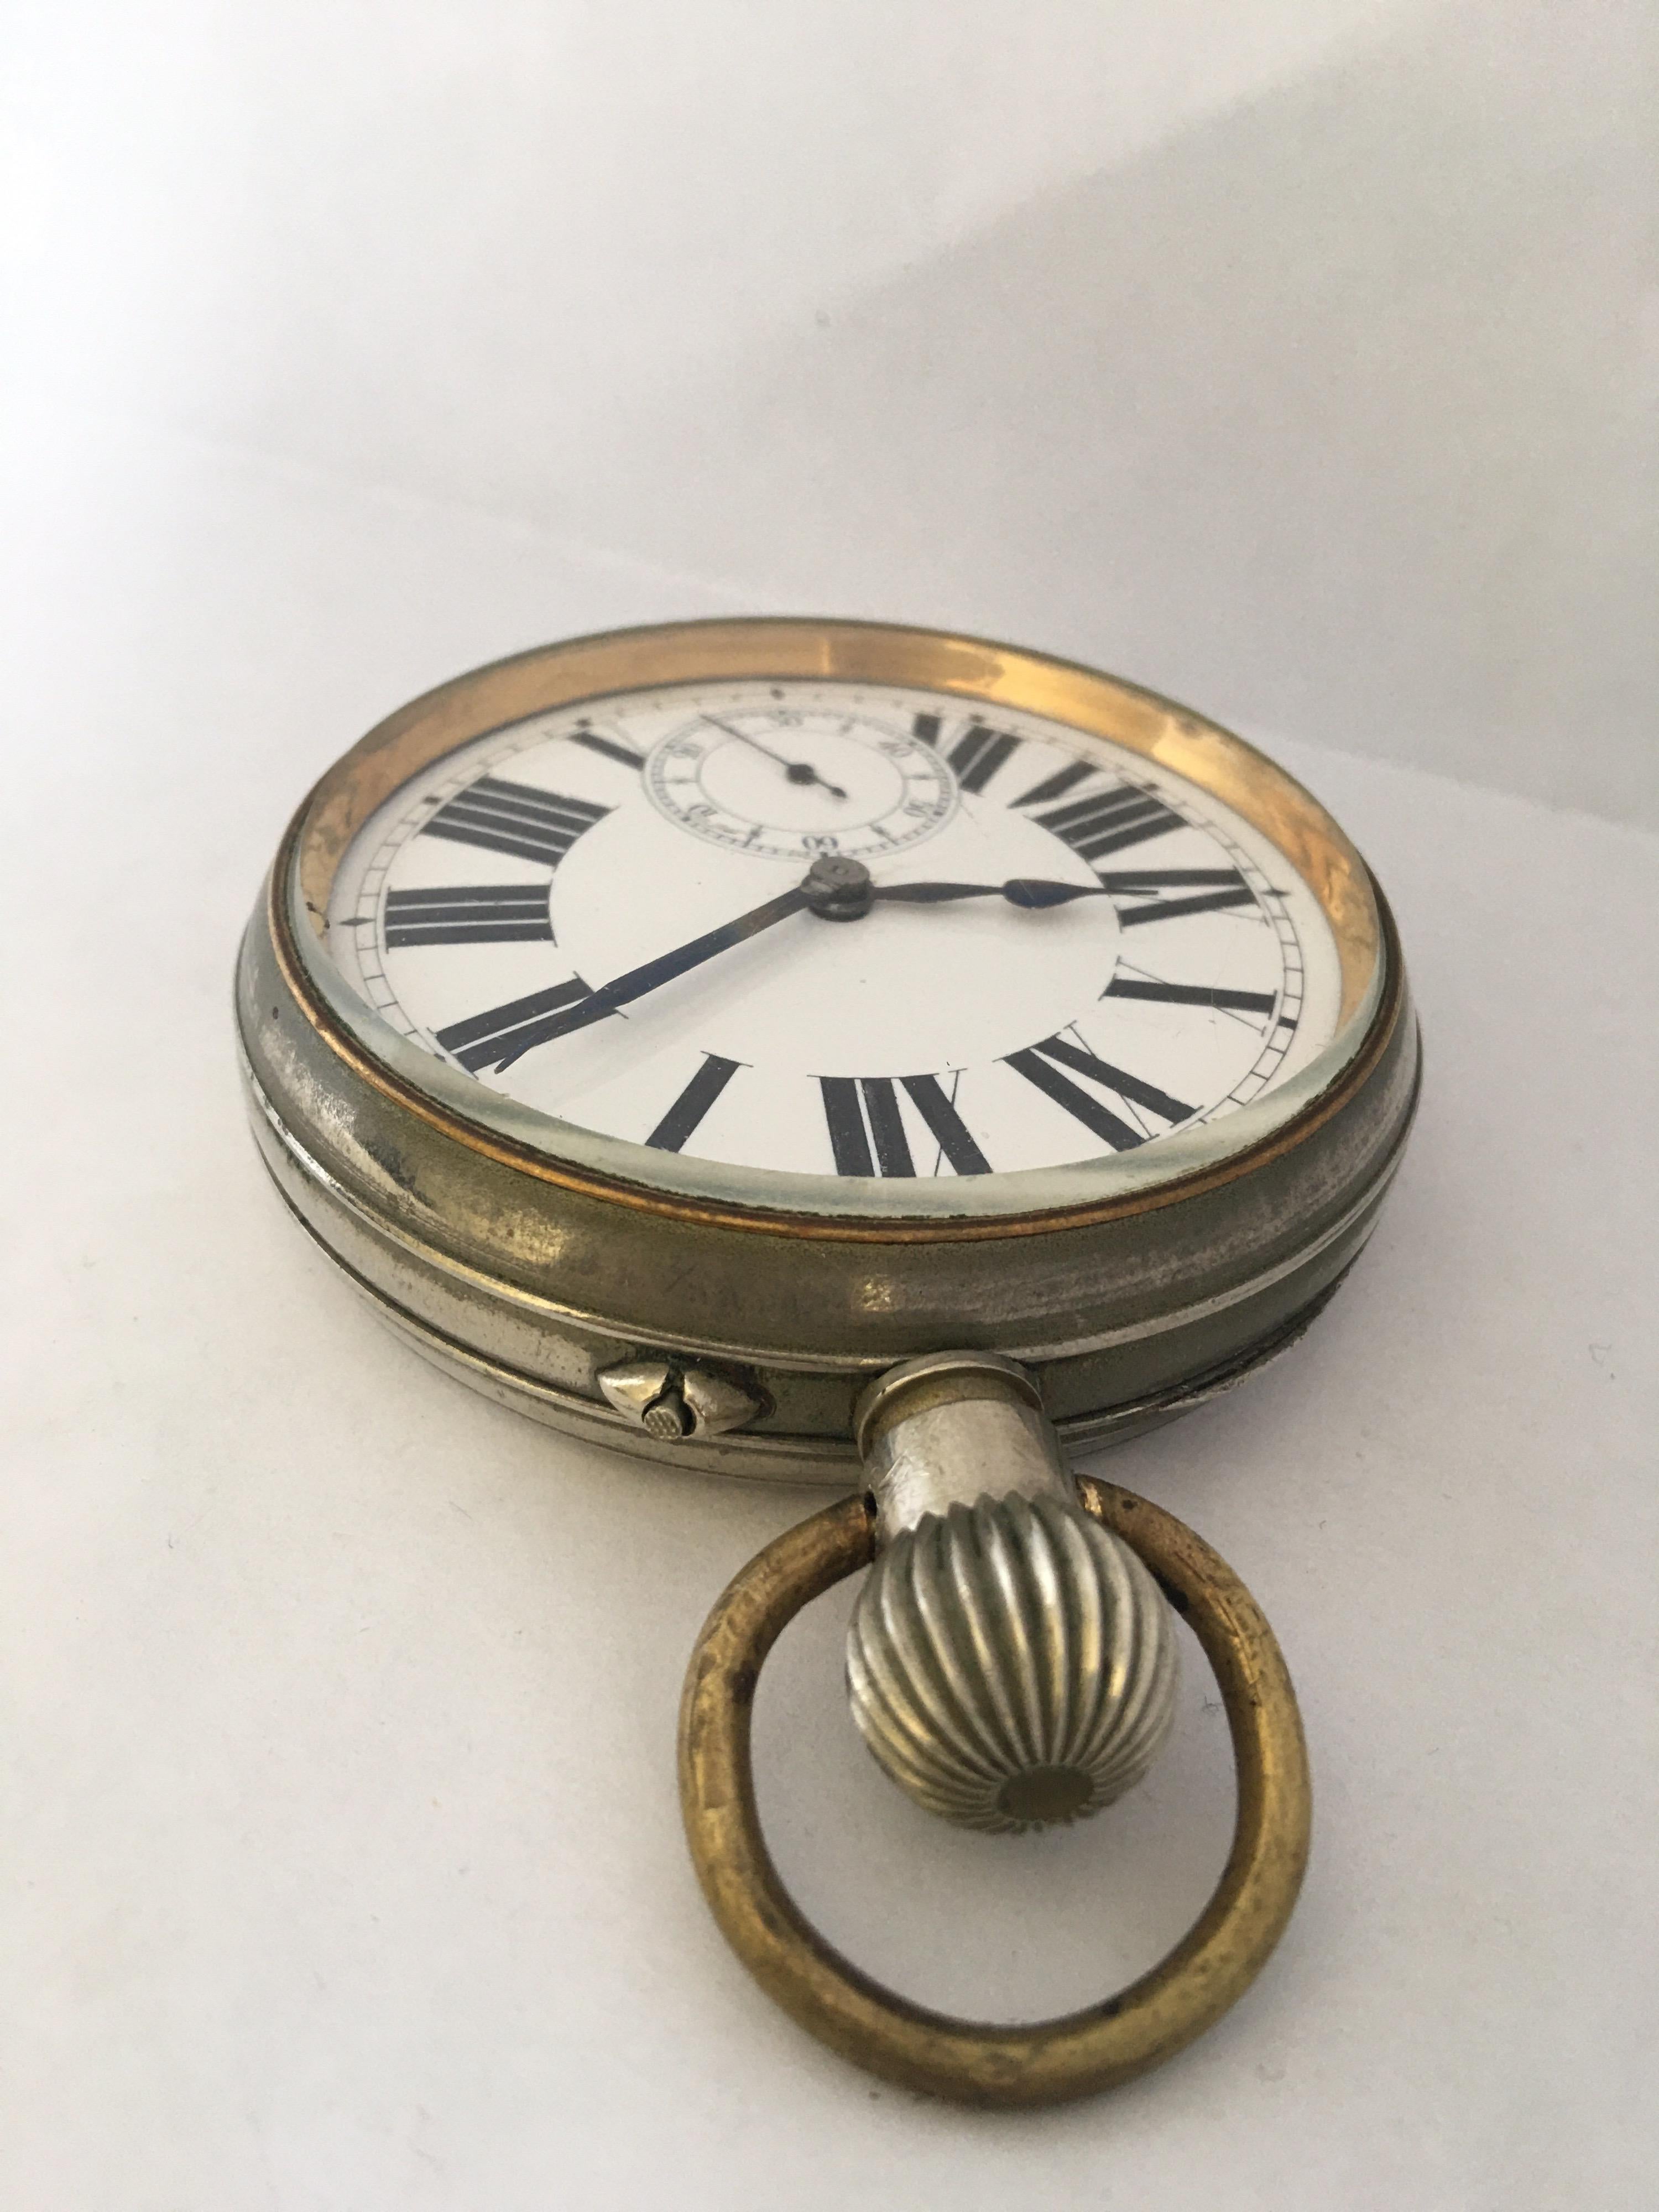 This charming antique big hand winding pocket watch is working and it is ticking well. Visible signs of ageing and used with some scratches on the glass and on the watch case. There is a small hairline crack on the middle part of the dial as shown.